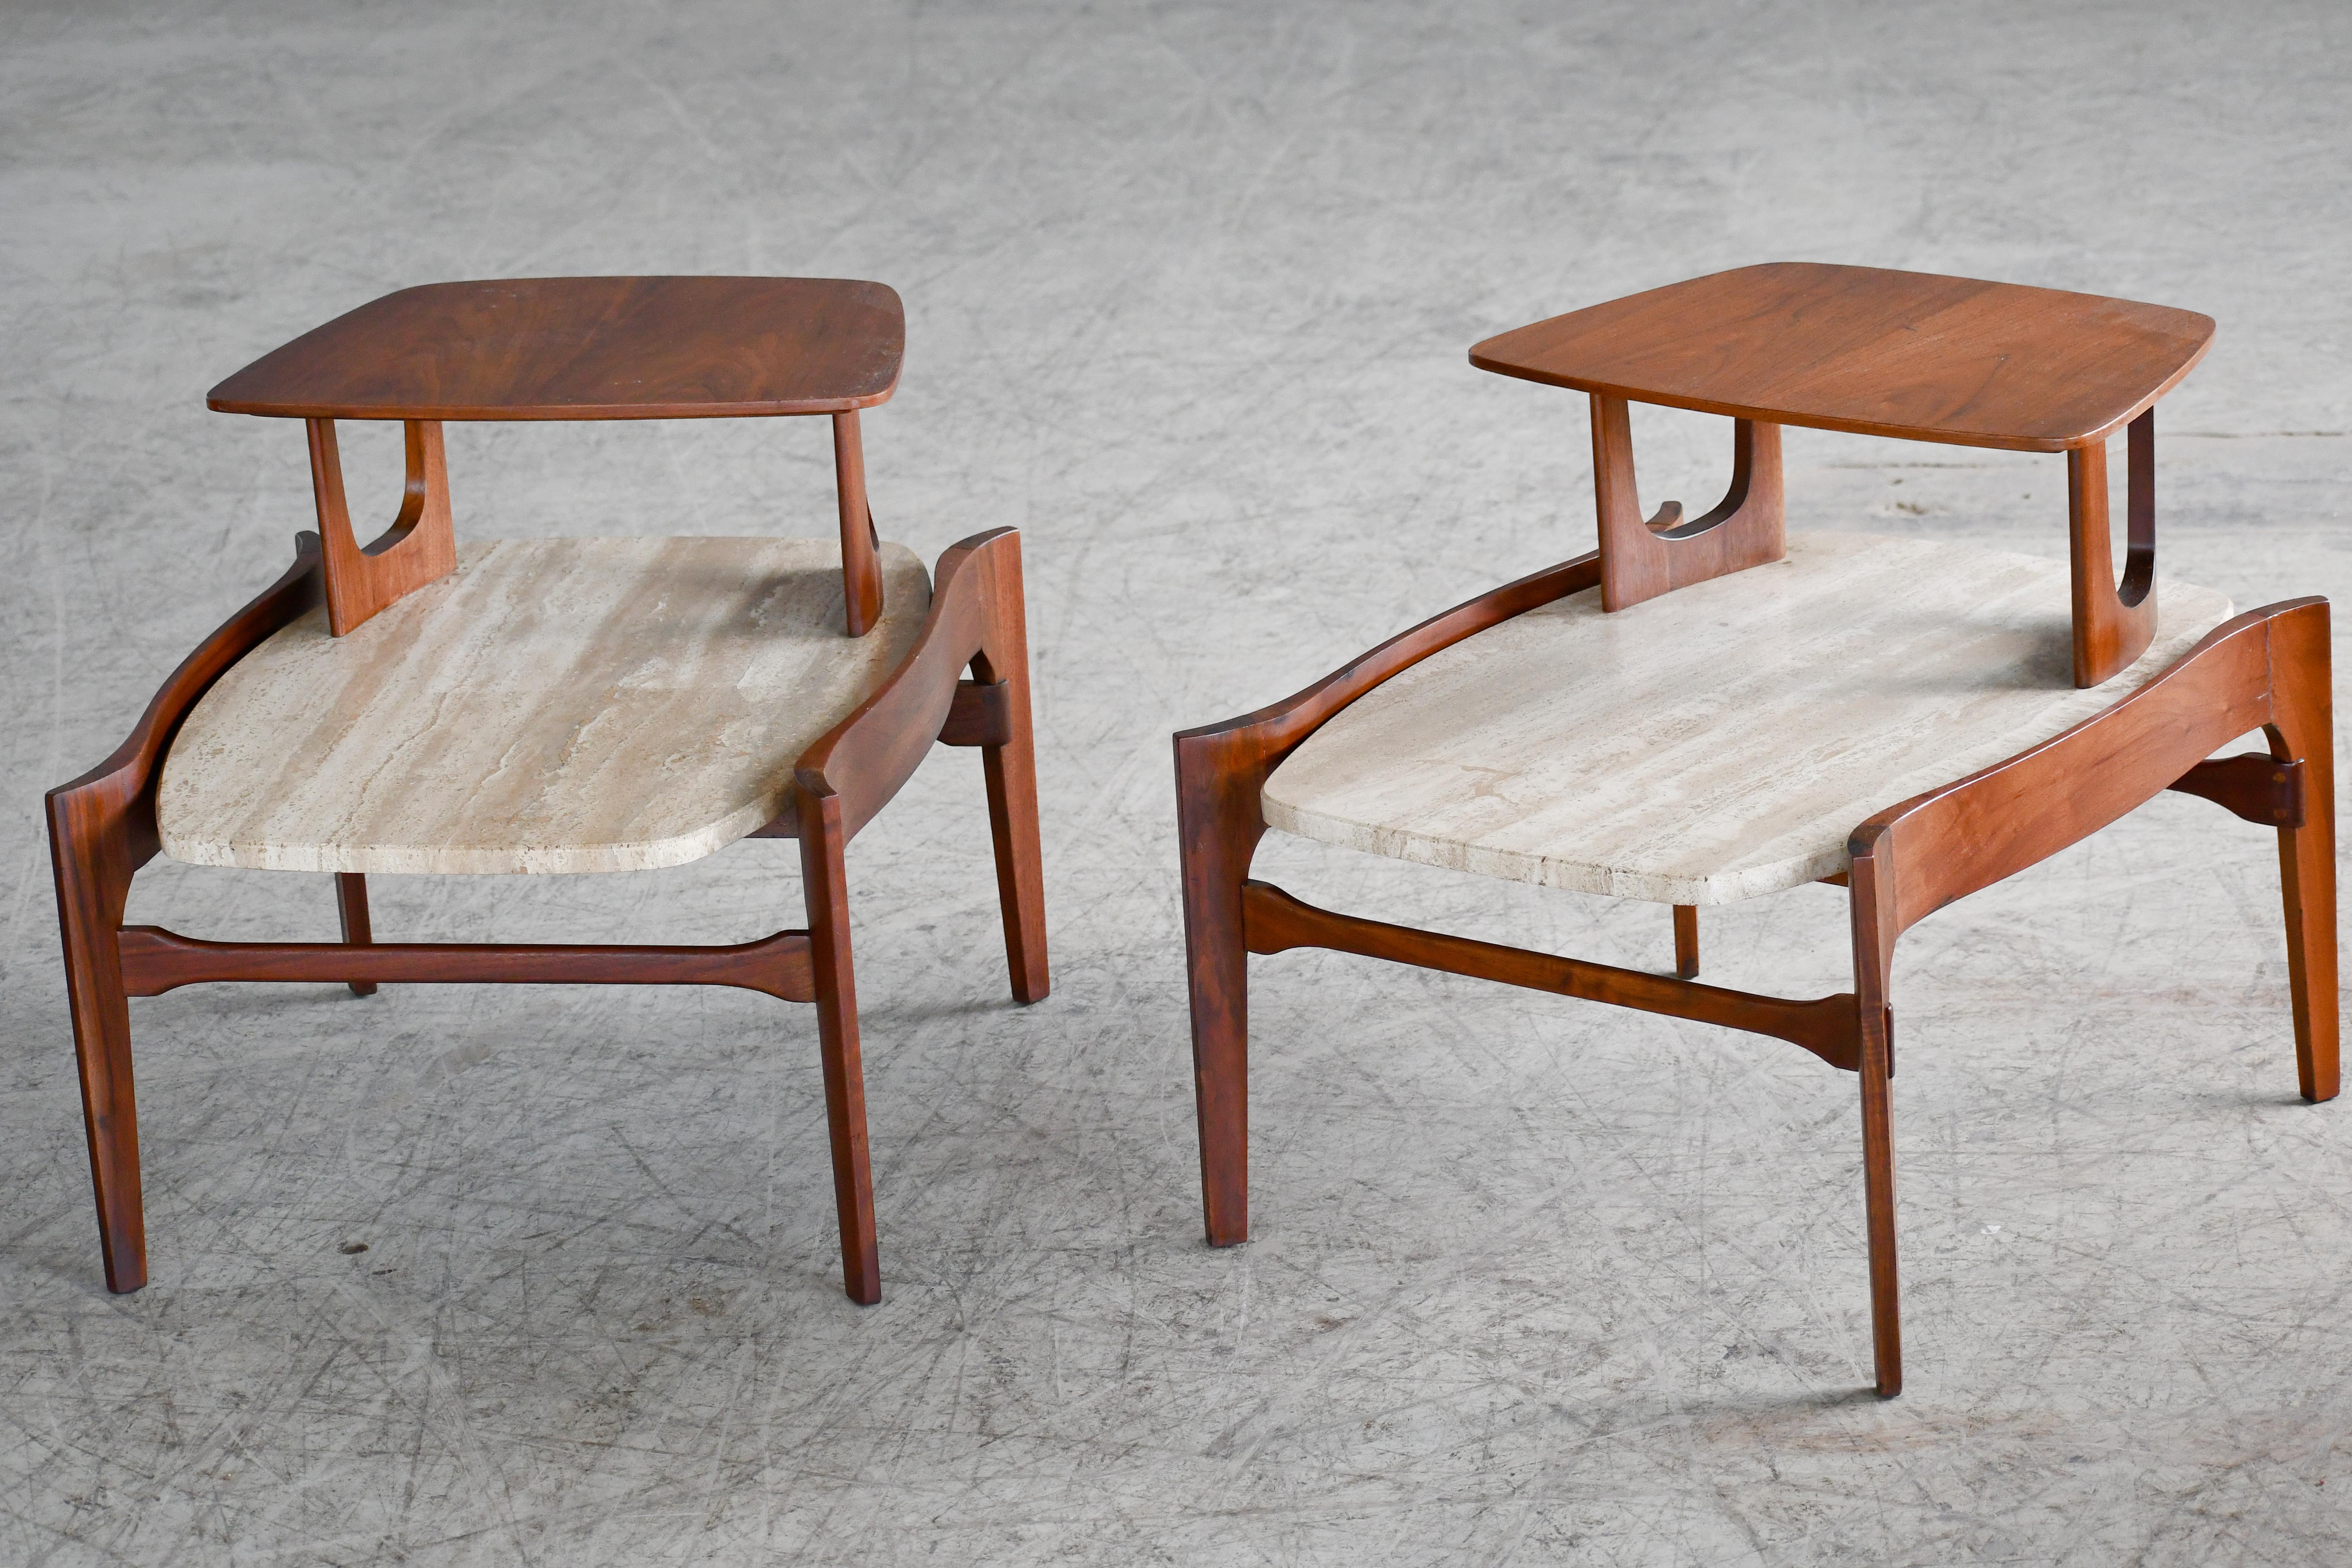 Fabulous two-tier boat tail shaped side or end tables designed by M. Singer and Sons produced in the 1950s. Very sculptural walnut frames with 